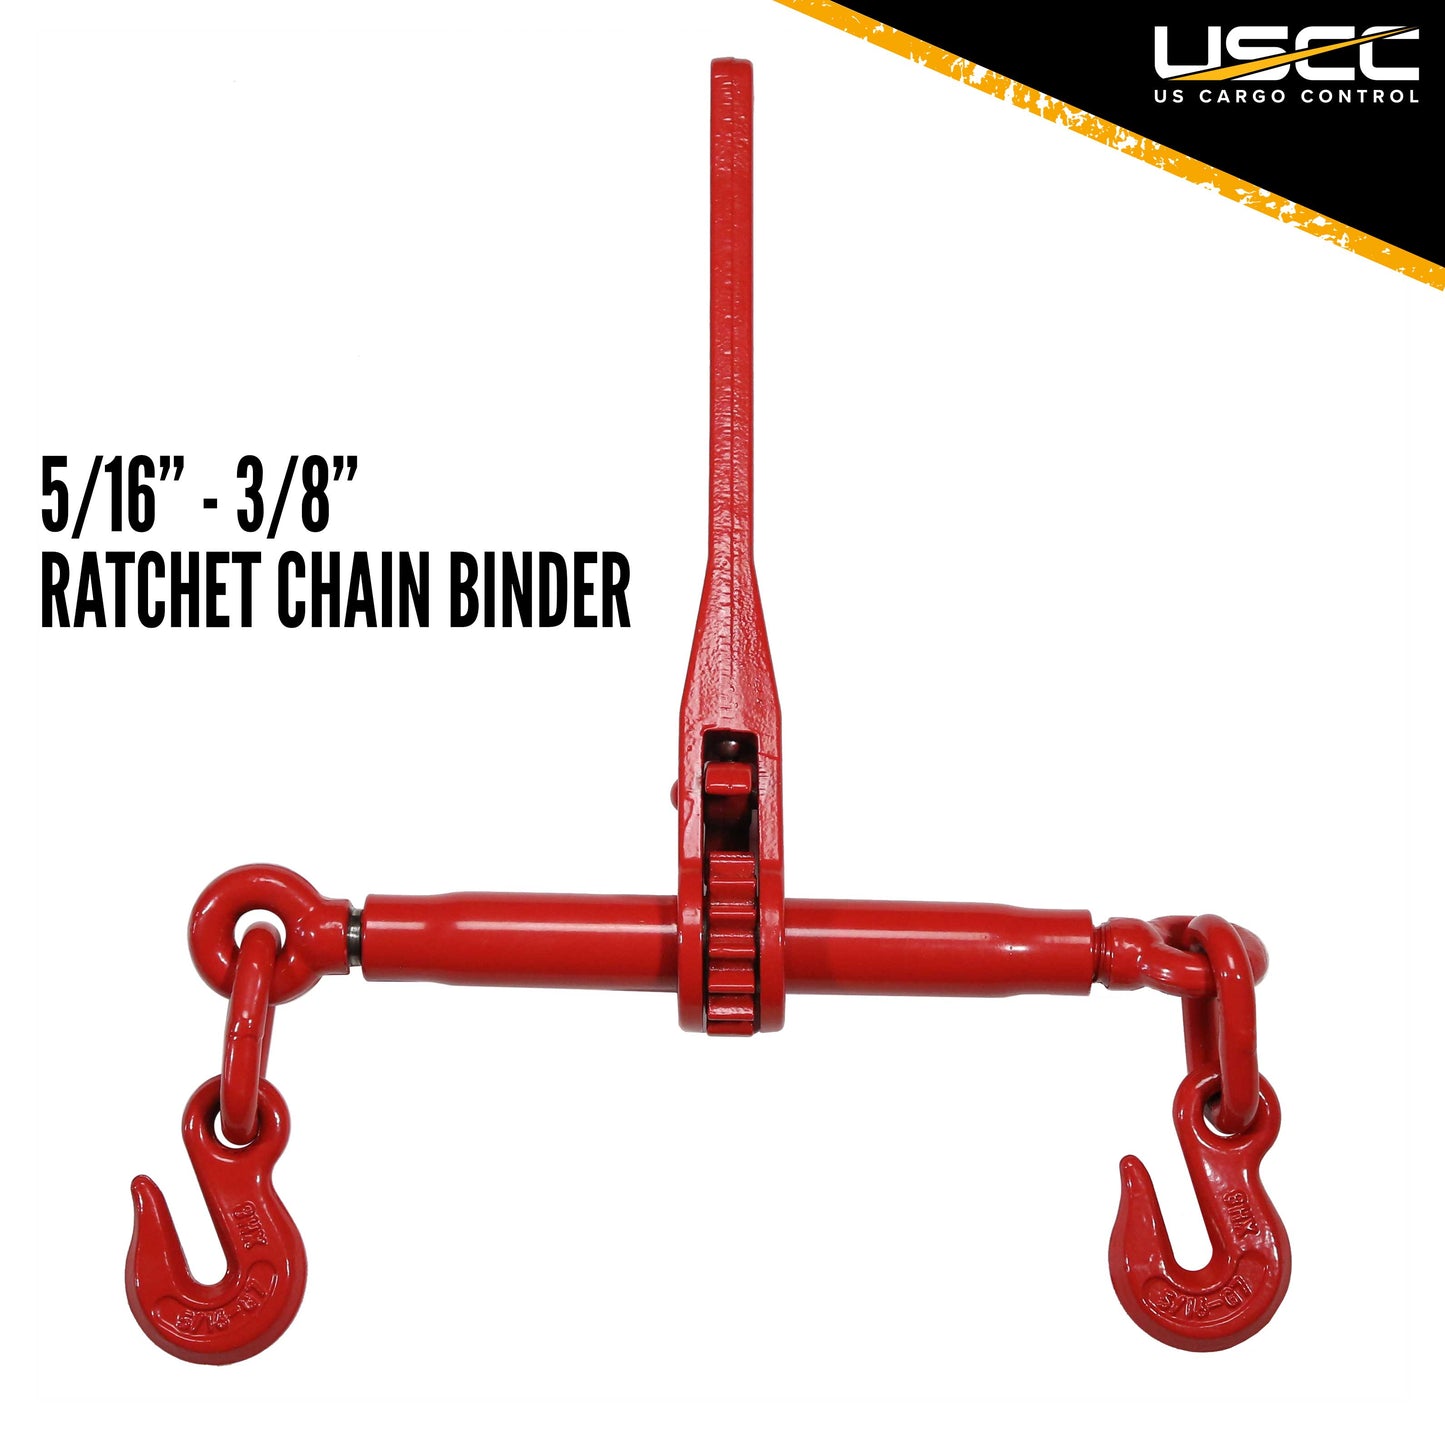 Grade 70 516 inch x 25 foot ChainRatchet Binder Kit image 2 of 8